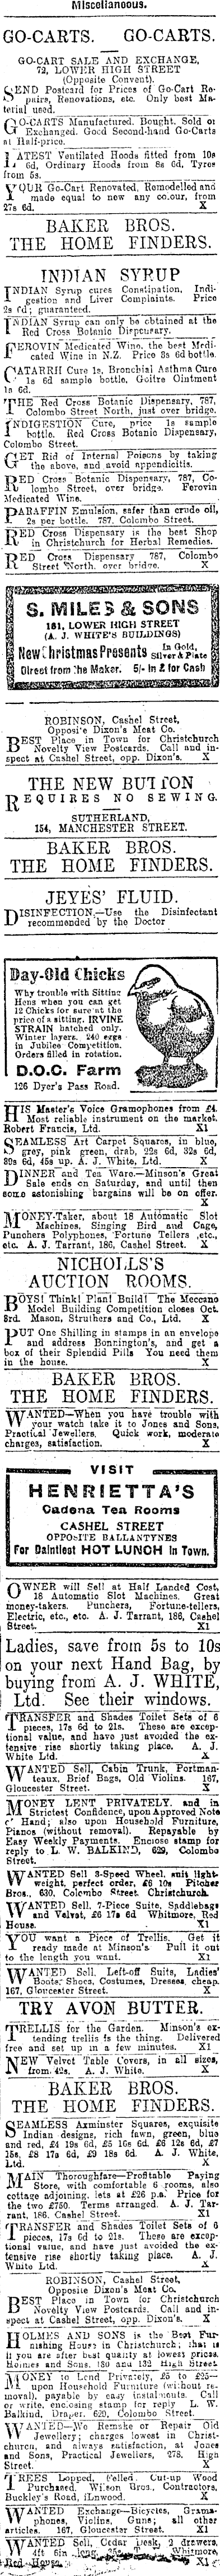 Papers Past Newspapers Star Christchurch 3 October 1914 Page 15 Advertisements Column 2